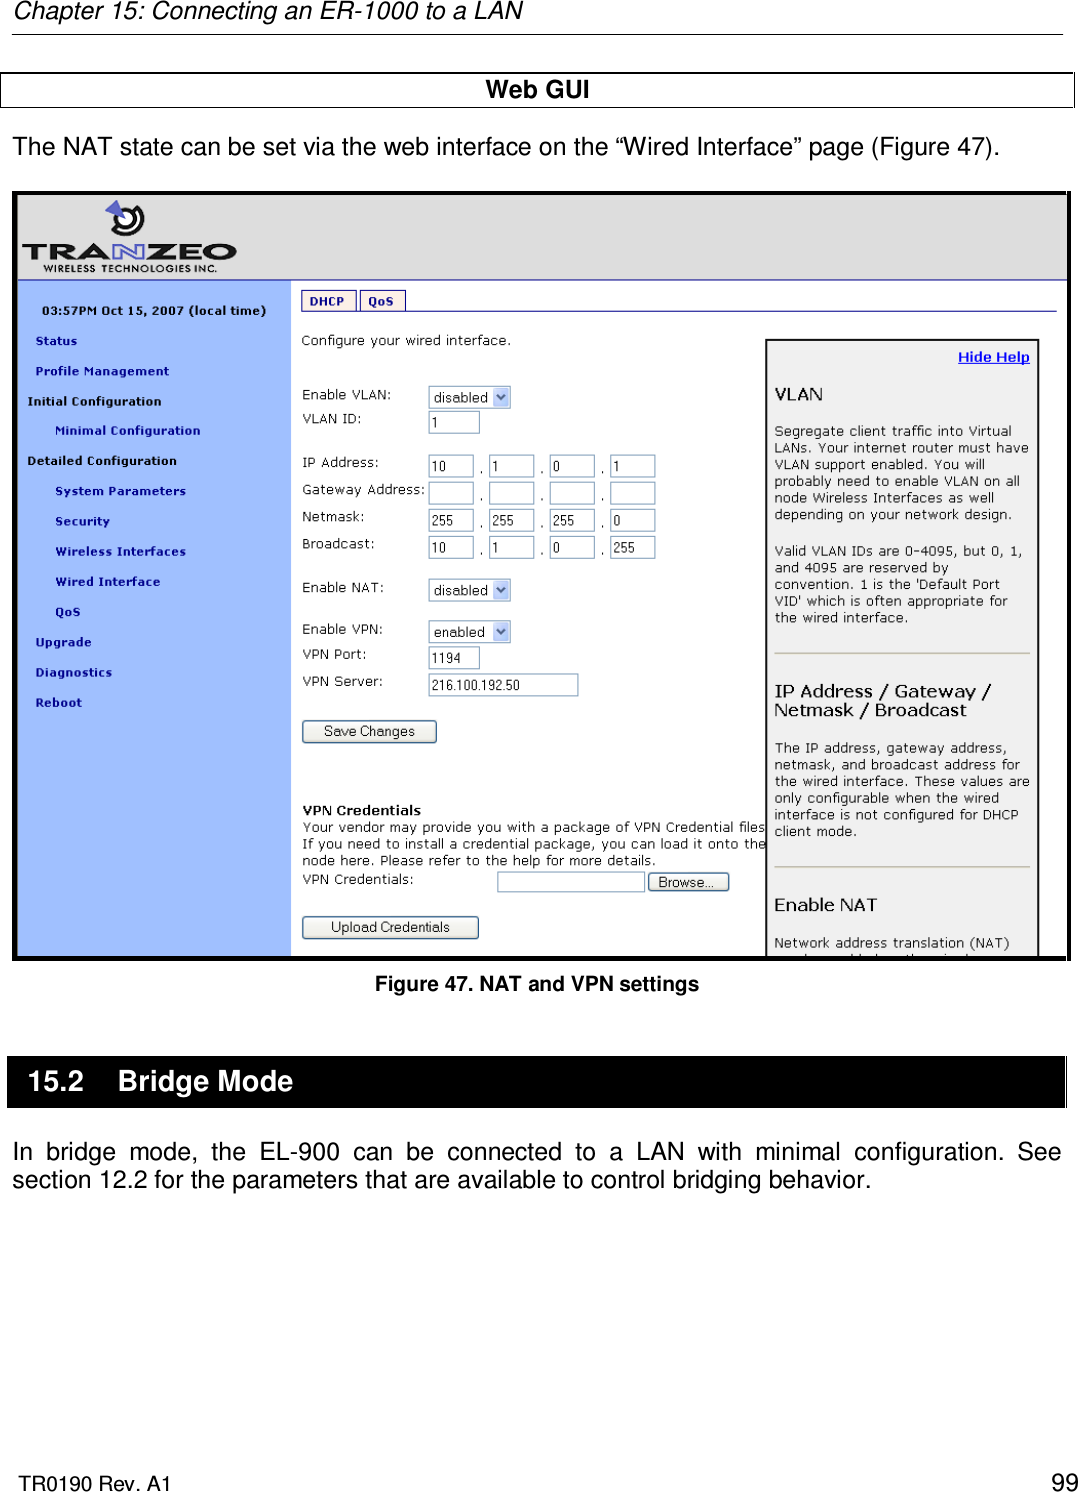 Chapter 15: Connecting an ER-1000 to a LAN  TR0190 Rev. A1    99 Web GUI The NAT state can be set via the web interface on the “Wired Interface” page (Figure 47).   Figure 47. NAT and VPN settings 15.2  Bridge Mode In  bridge  mode,  the  EL-900  can  be  connected  to  a  LAN  with  minimal  configuration.  See section 12.2 for the parameters that are available to control bridging behavior.  